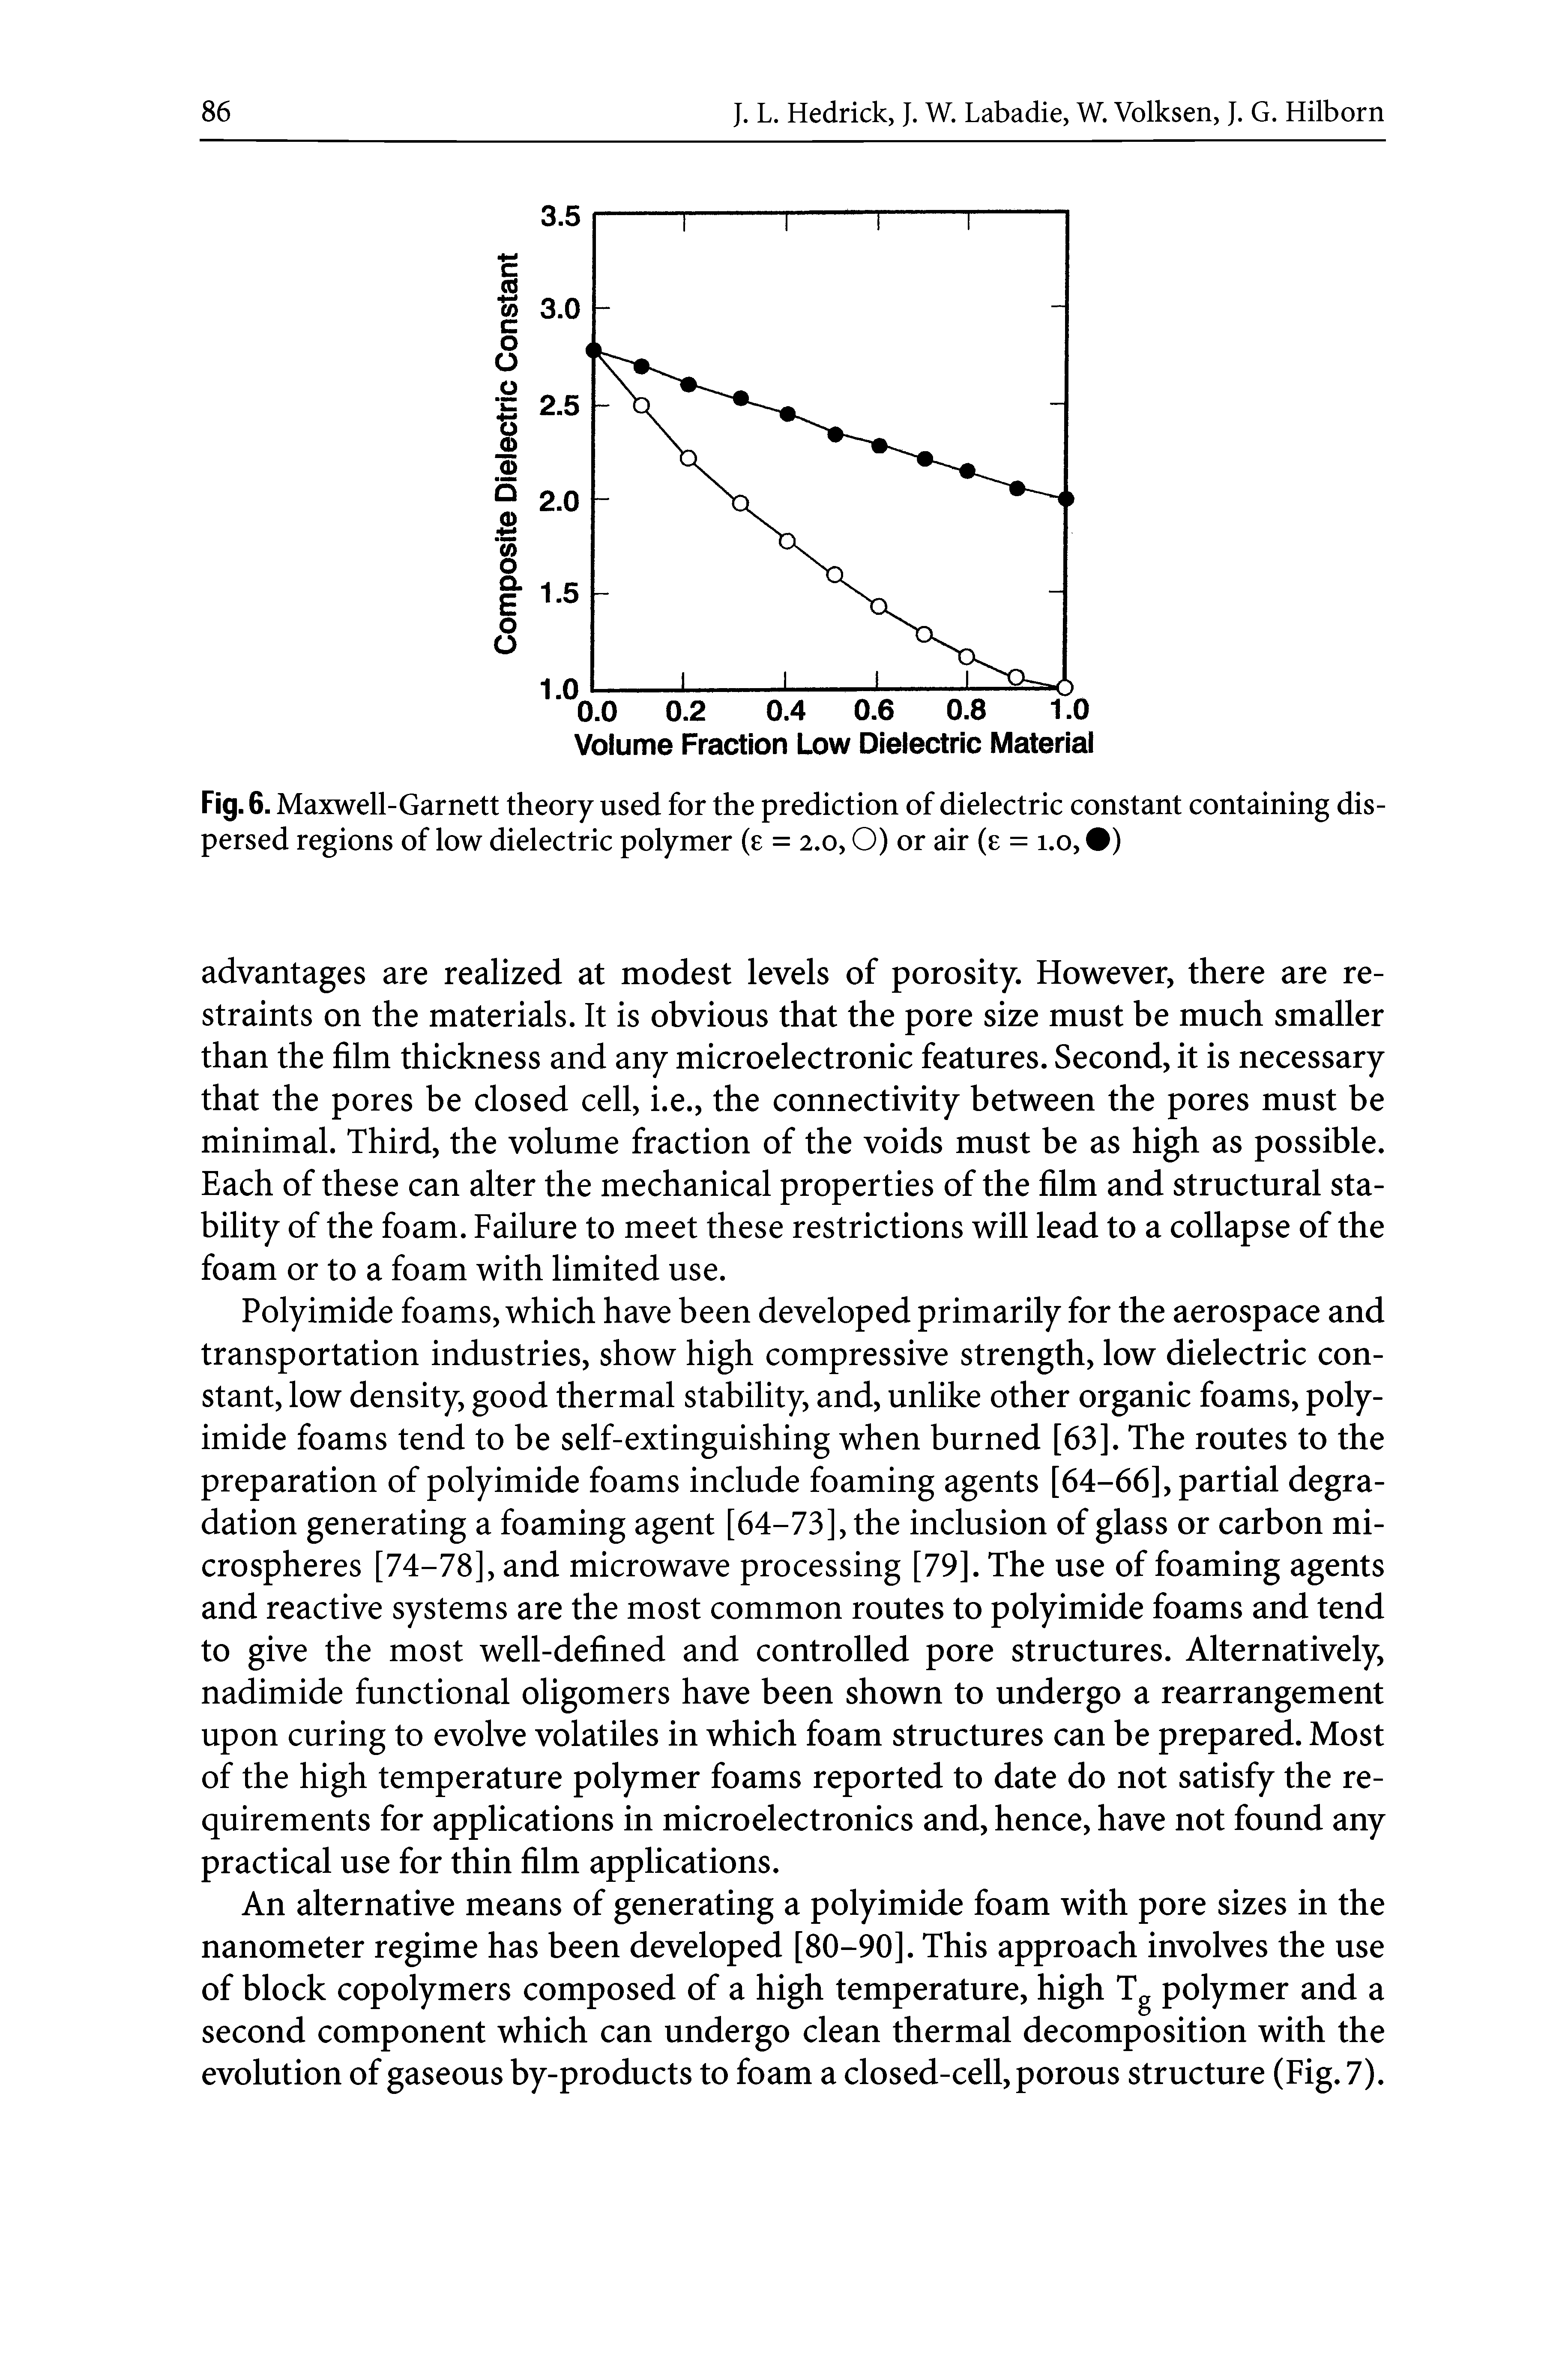 Fig. 6. Maxwell-Garnett theory used for the prediction of dielectric constant containing dispersed regions of low dielectric polymer (e = 2.0,0) or air (e = 1.0, )...